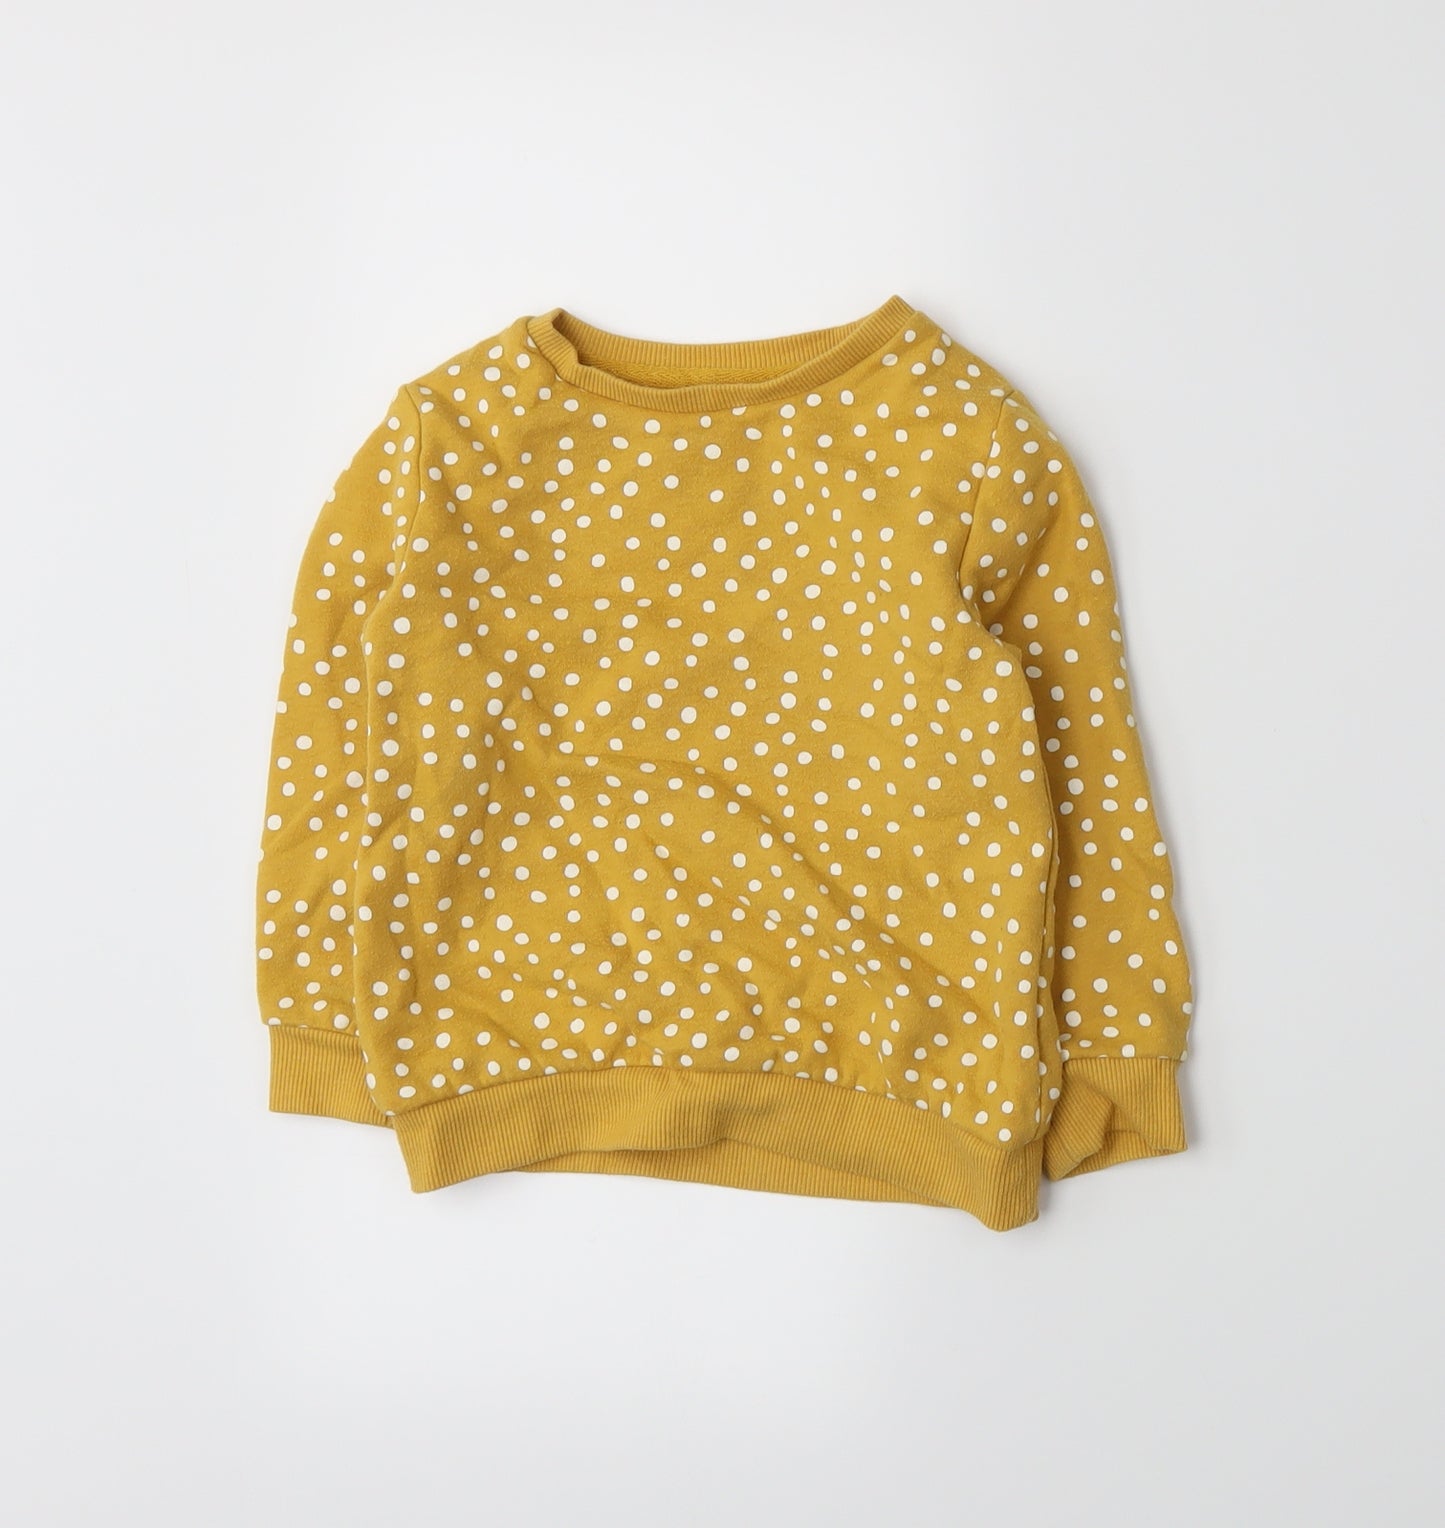 F&F Girls Yellow Spotted Jersey Pullover Sweatshirt Size 2-3 Years